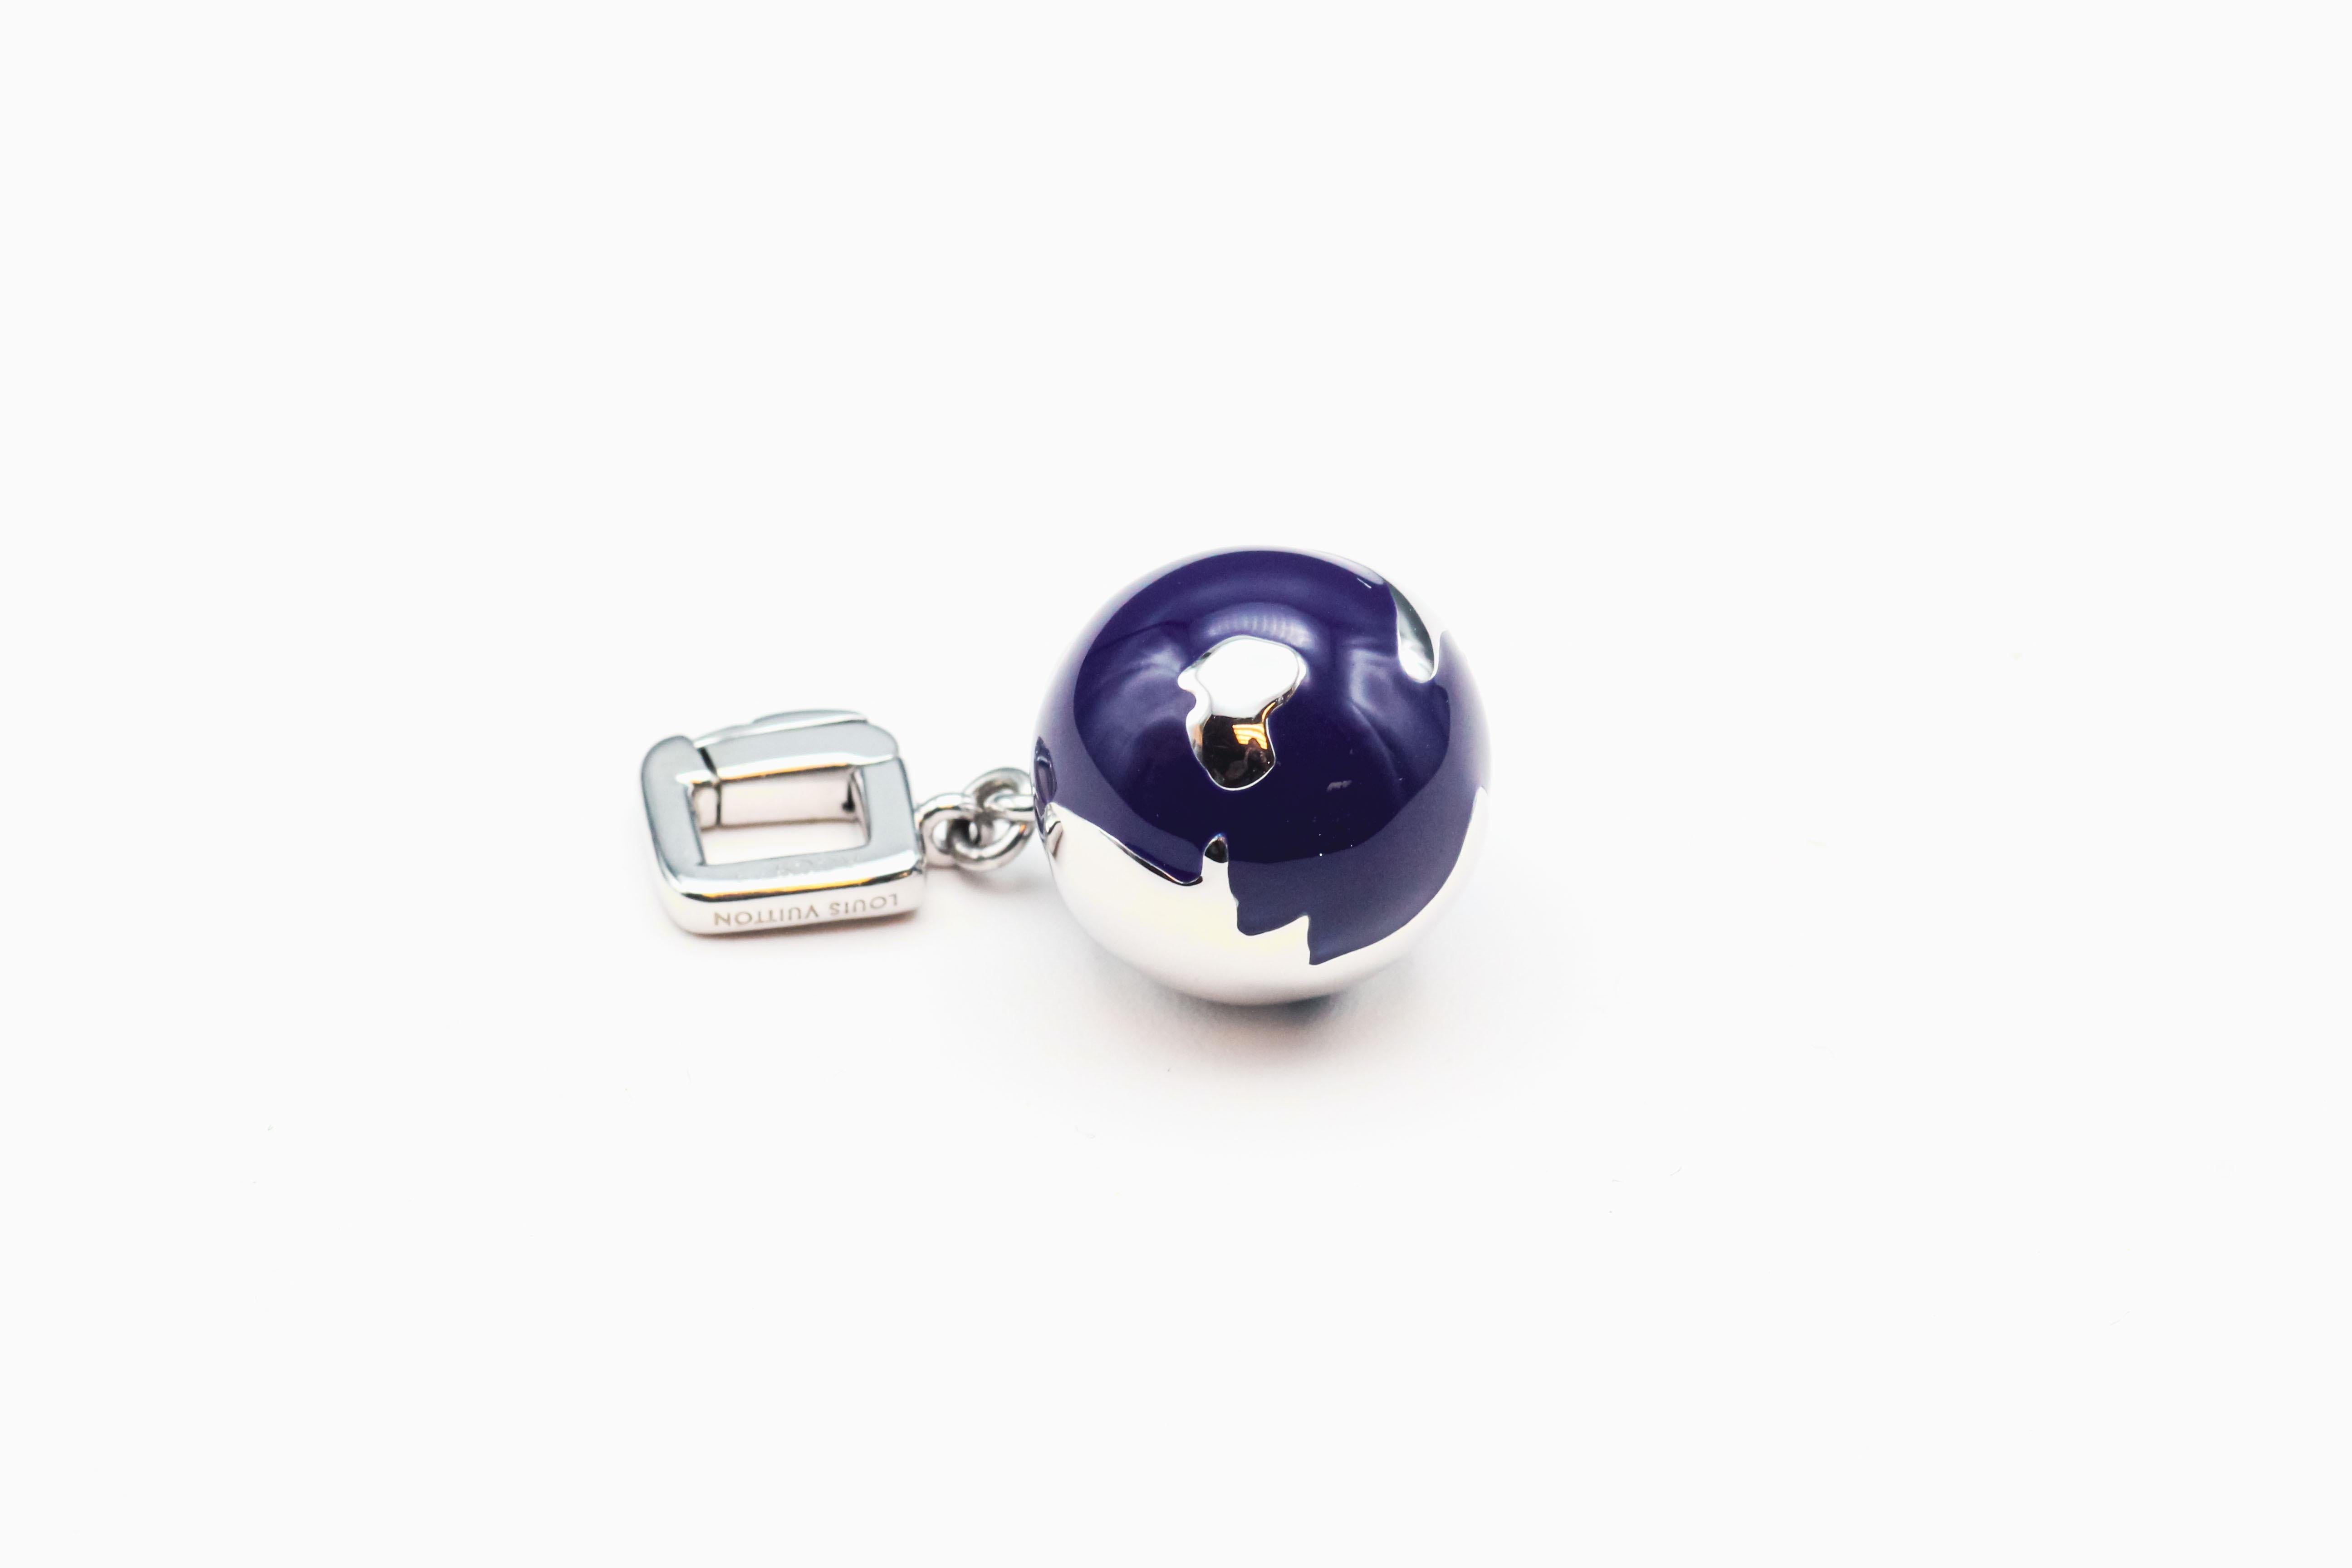 Embark on a journey of elegance and refinement with this Louis Vuitton diamond and enamel 18k white gold globe charm pendant. This exquisite piece seamlessly marries modern luxury with the timeless allure of world exploration, showcasing Louis